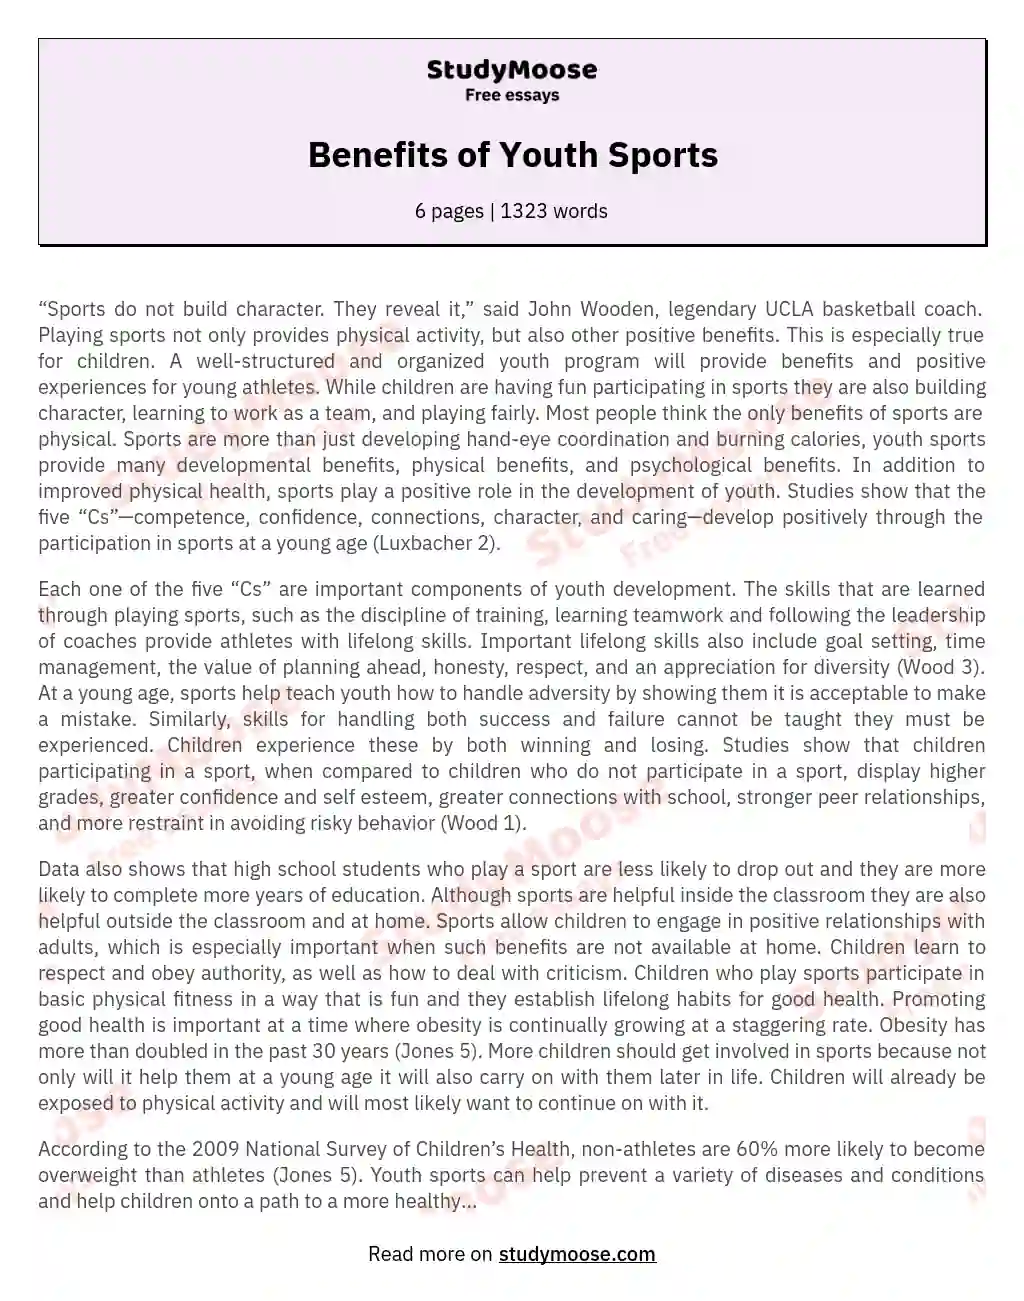 persuasive essay about youth sports